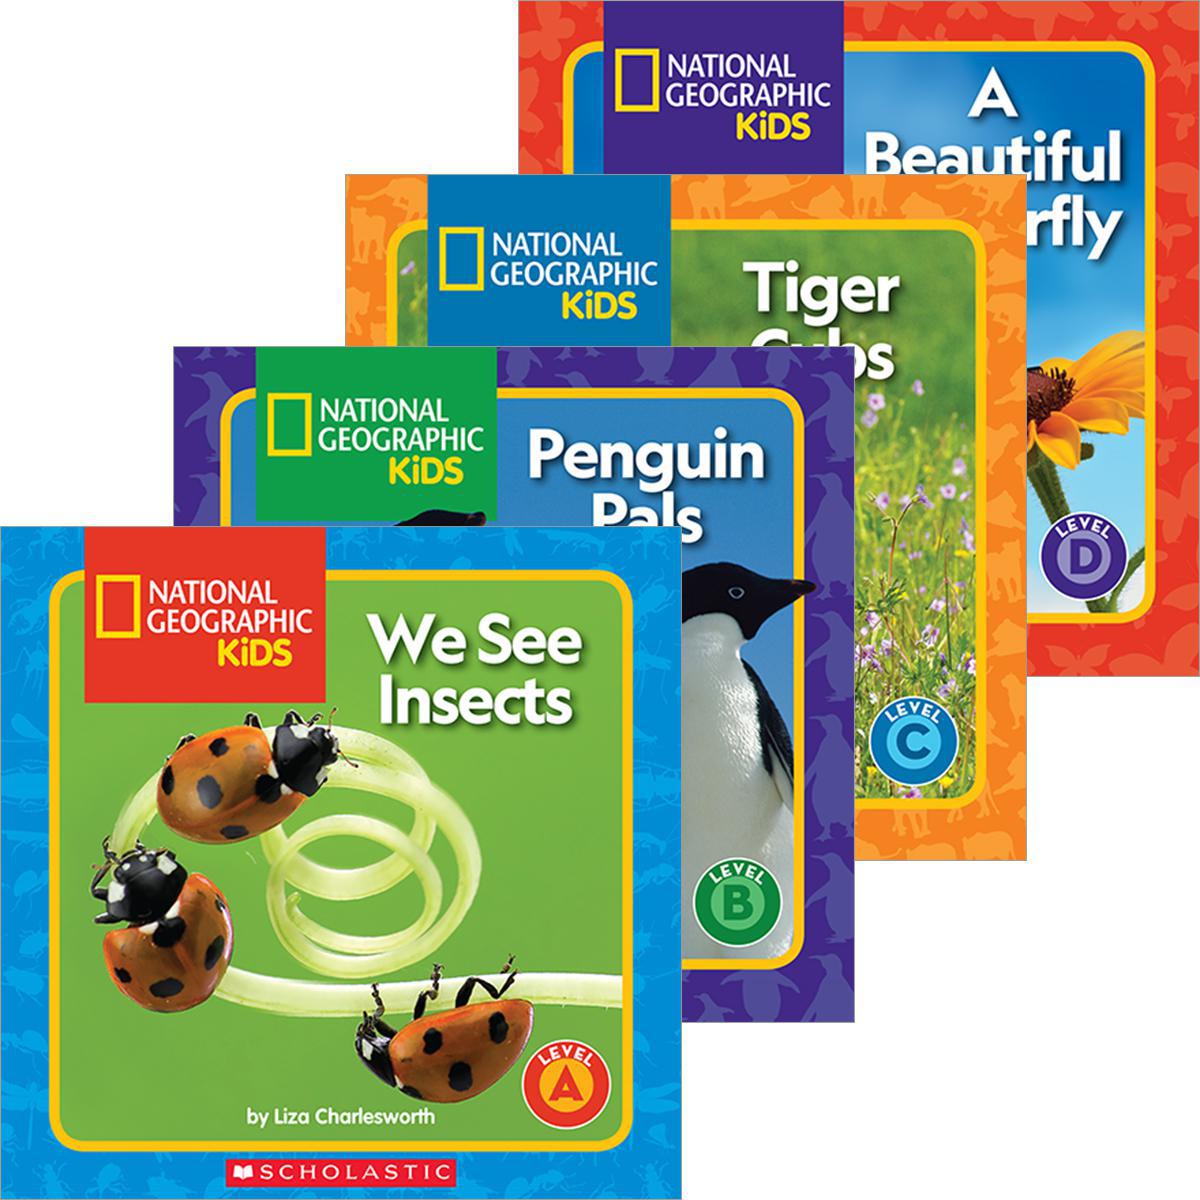  National Geographic Kids: Guided Reader 20-Pack (A-D) 